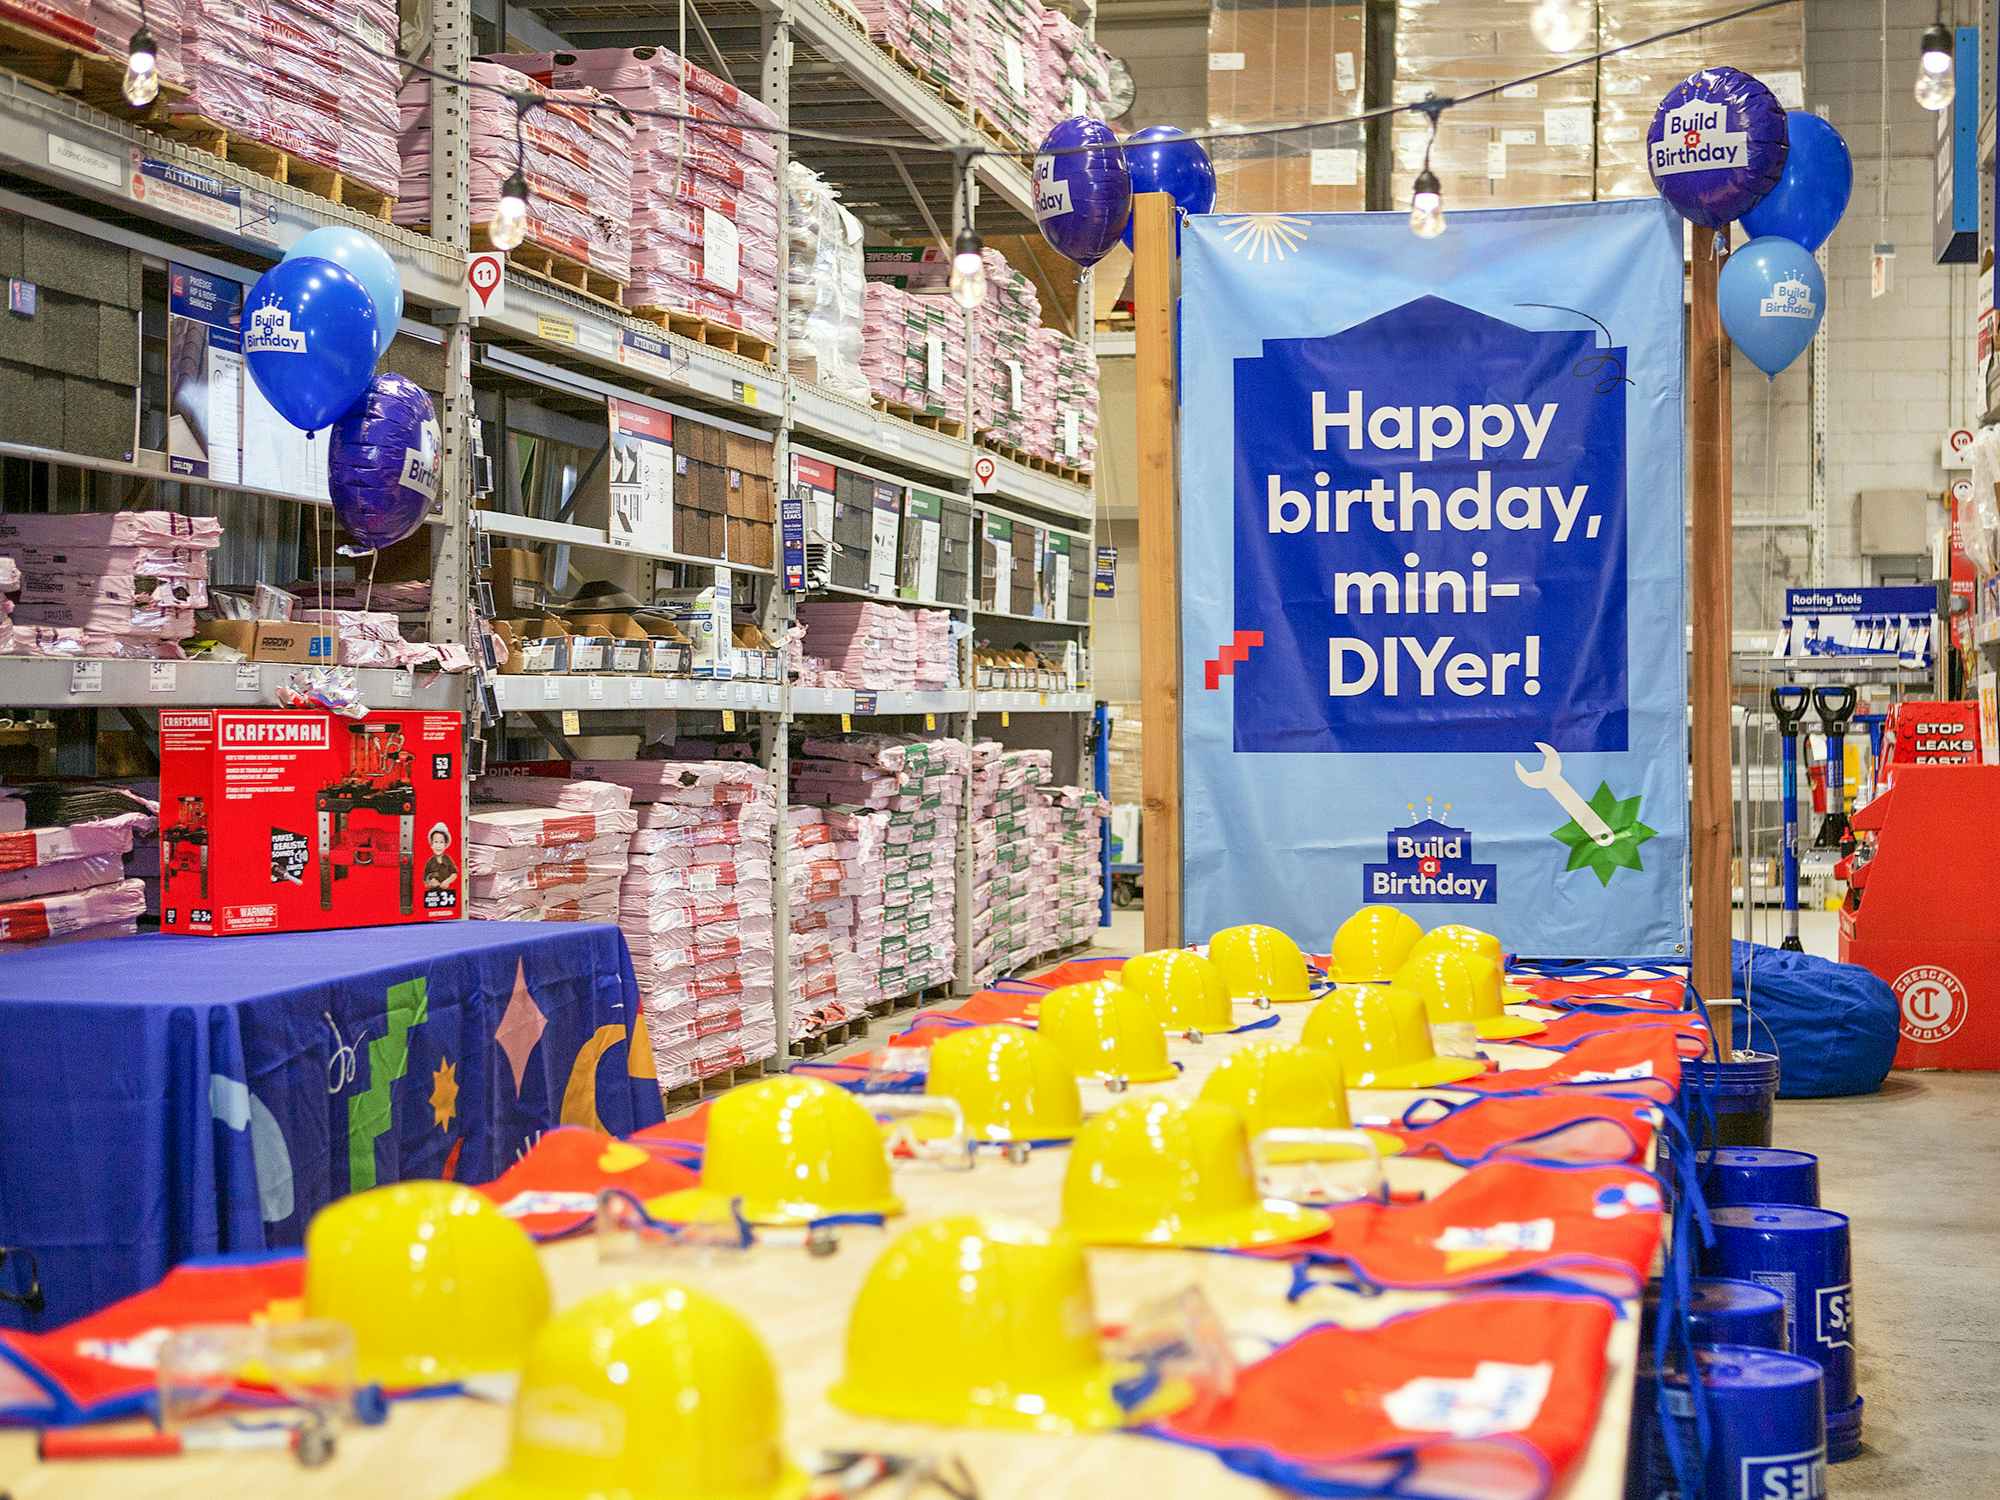 A Birthday party set up inside a Lowe's store with a sign that says "Happy Birthday mini DIY-er